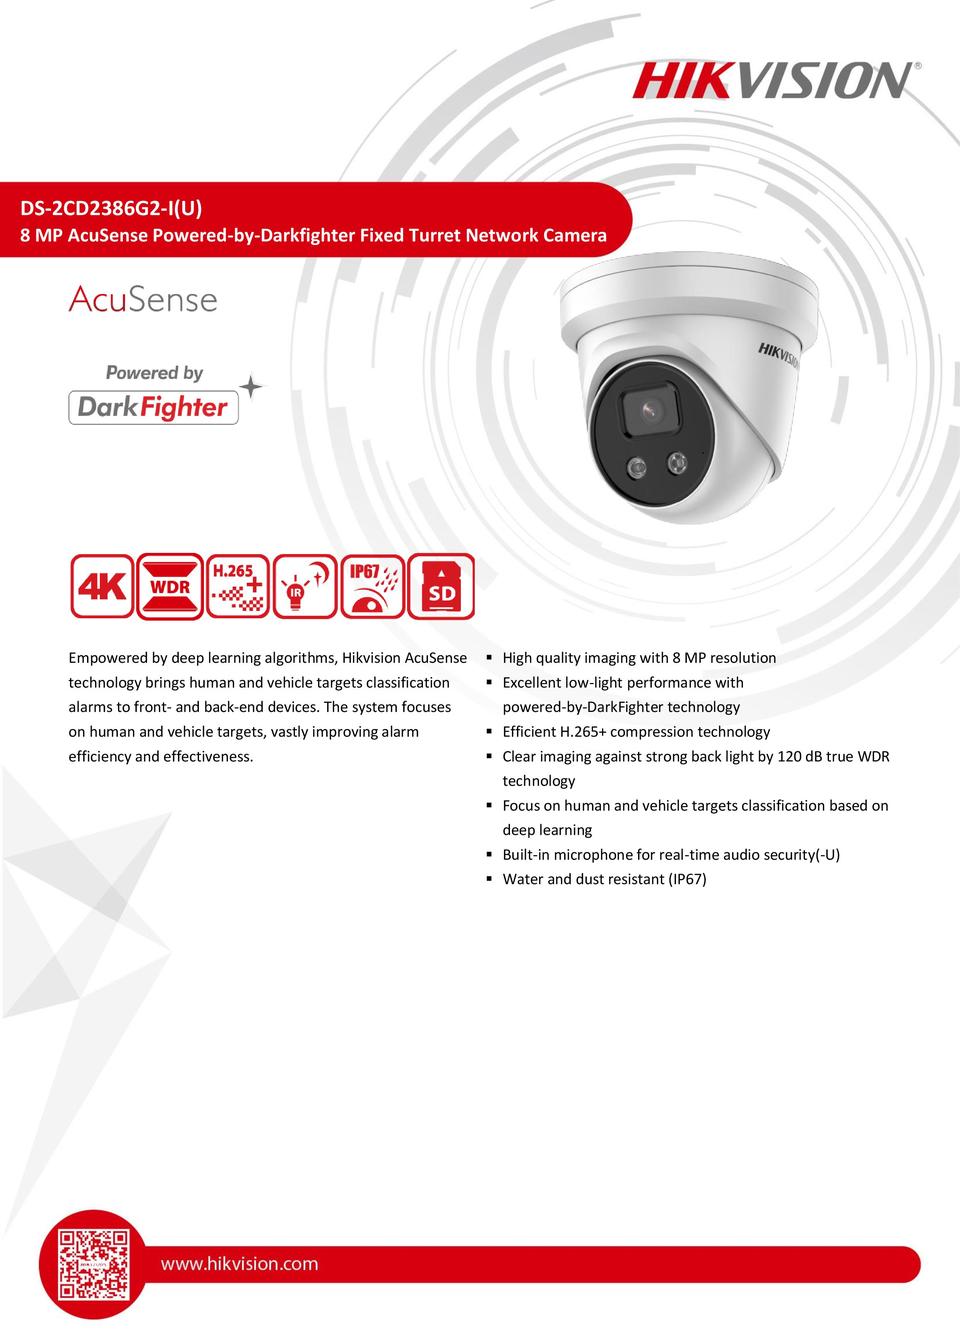 Hikvision DS-2CD2386G2-IU 8MP Gen2 Acusense IP Turret Camera with 2.8mm Lens - Shadow Series 0